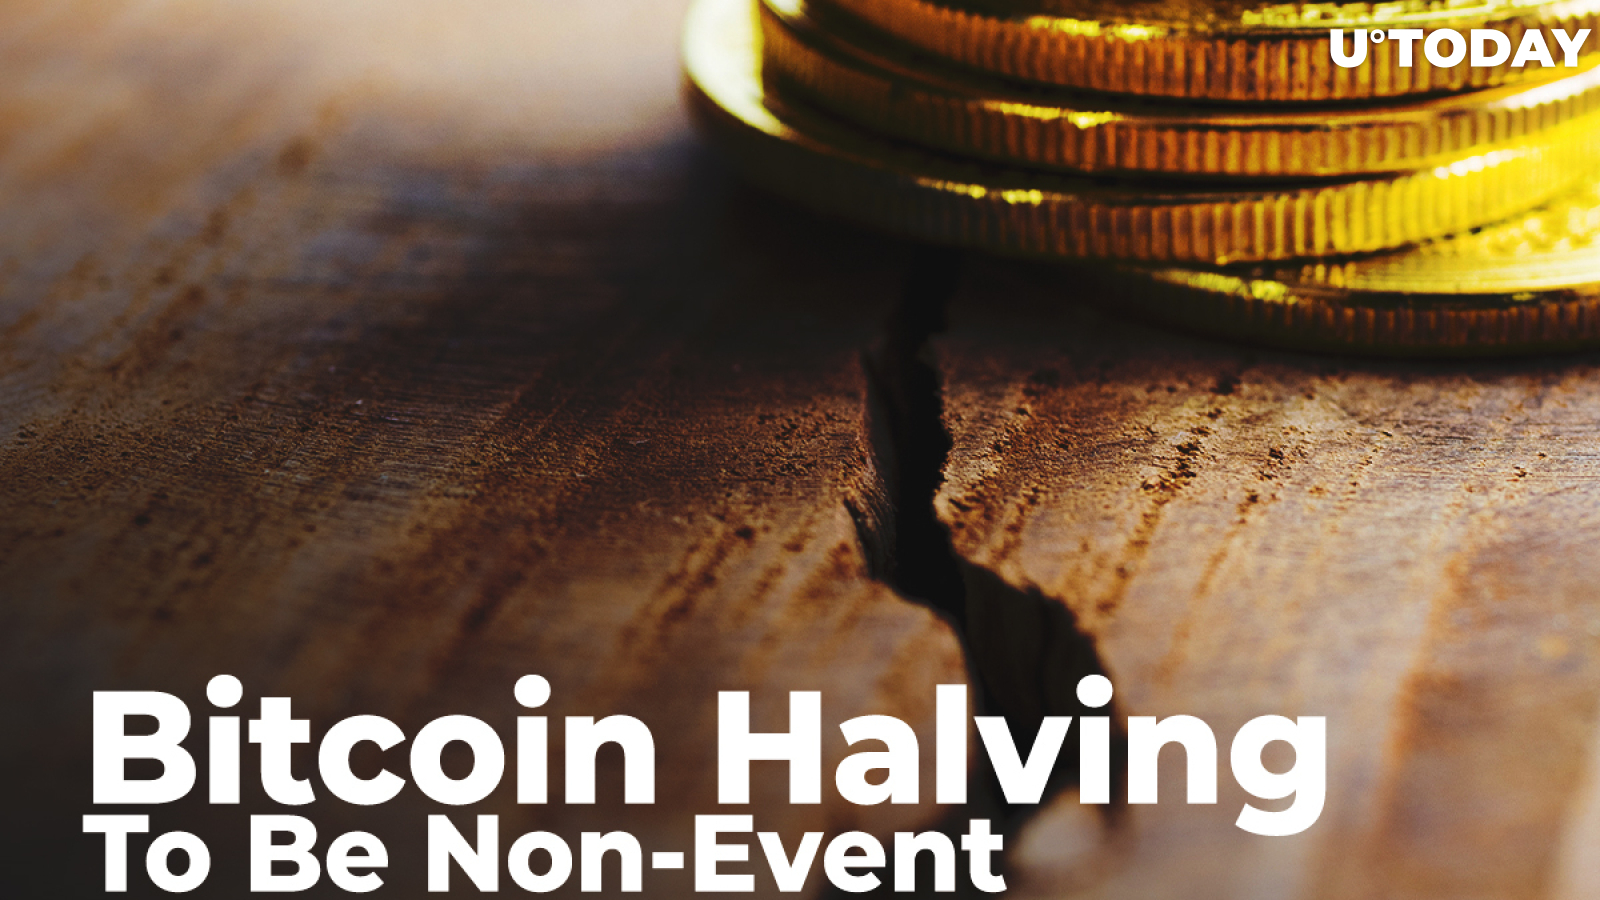 Bitcoin (BTC) Halving May Be Non-Event: Warning by Top Traders